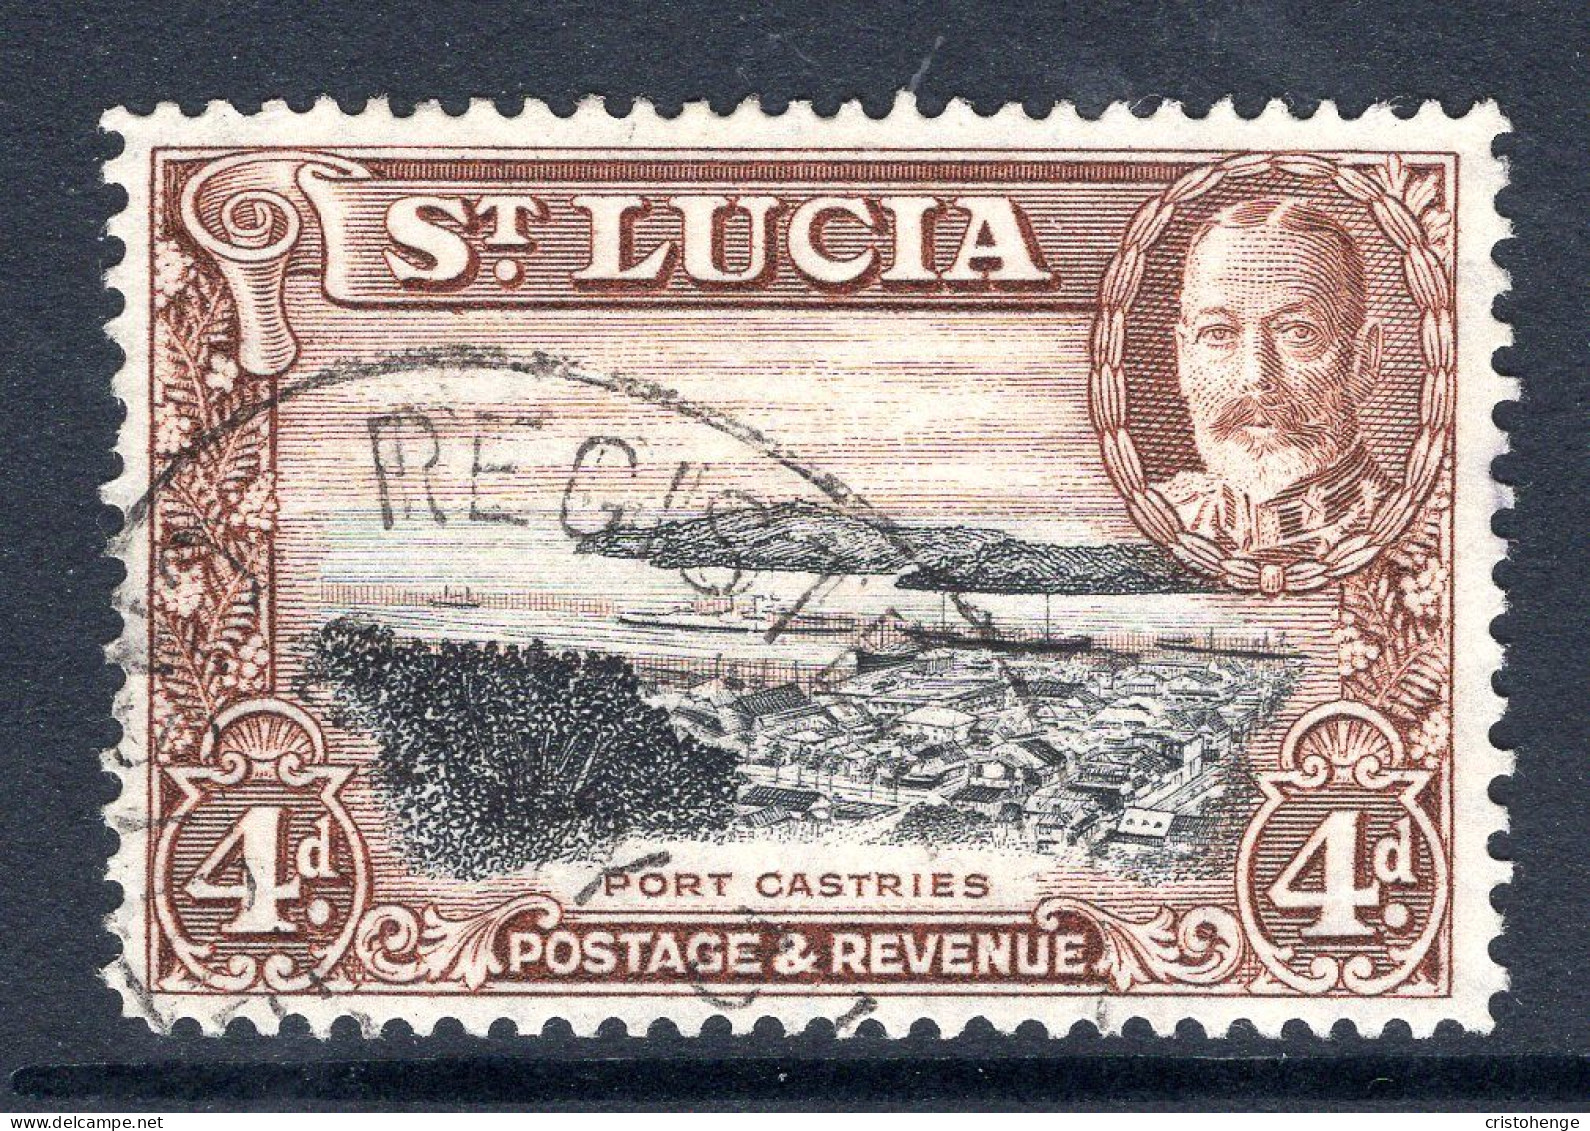 St Lucia 1936 KGV Pictorials - P.14 - 4d Port Castries Used (SG 119) - Ste Lucie (...-1978)